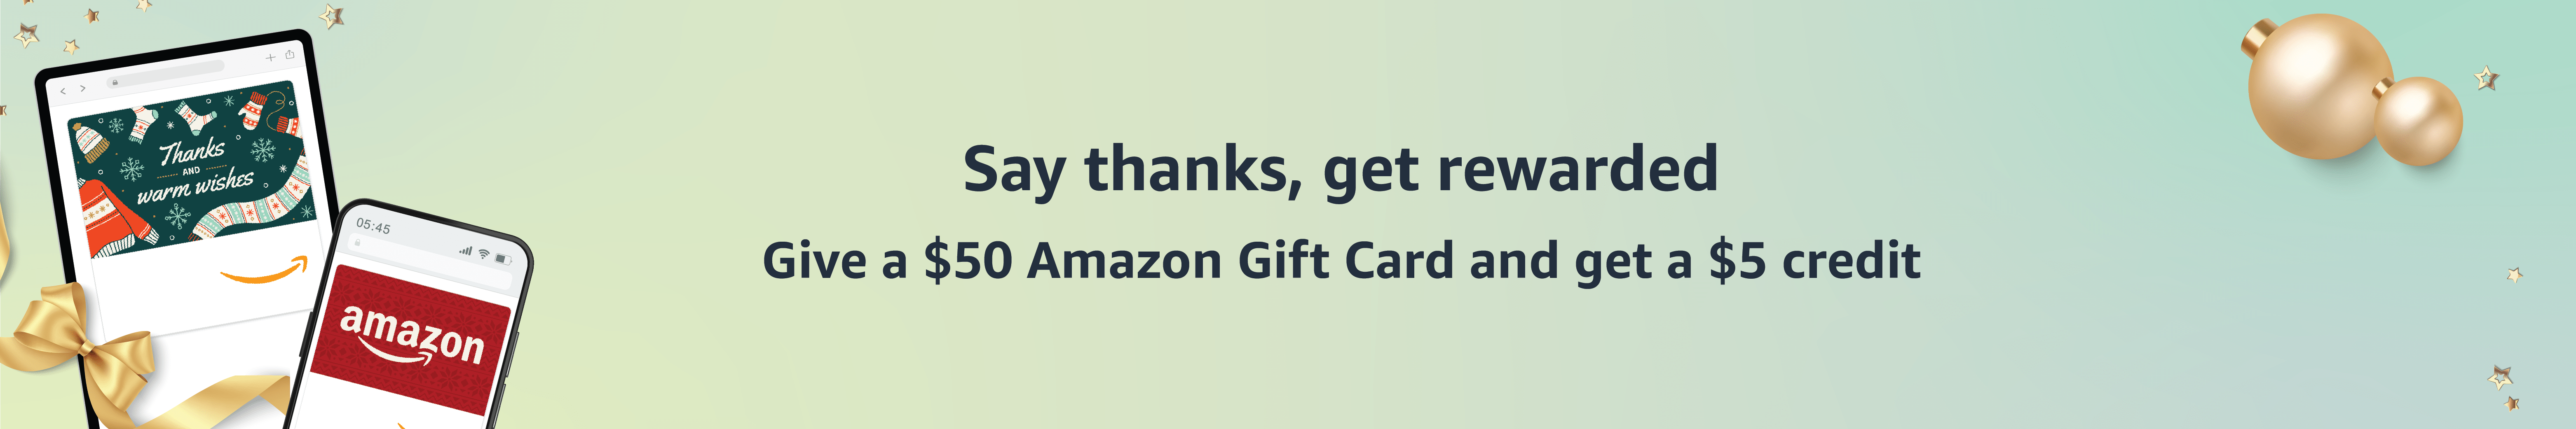 Give a $50 Amazon Gift Card and get a $5 credit